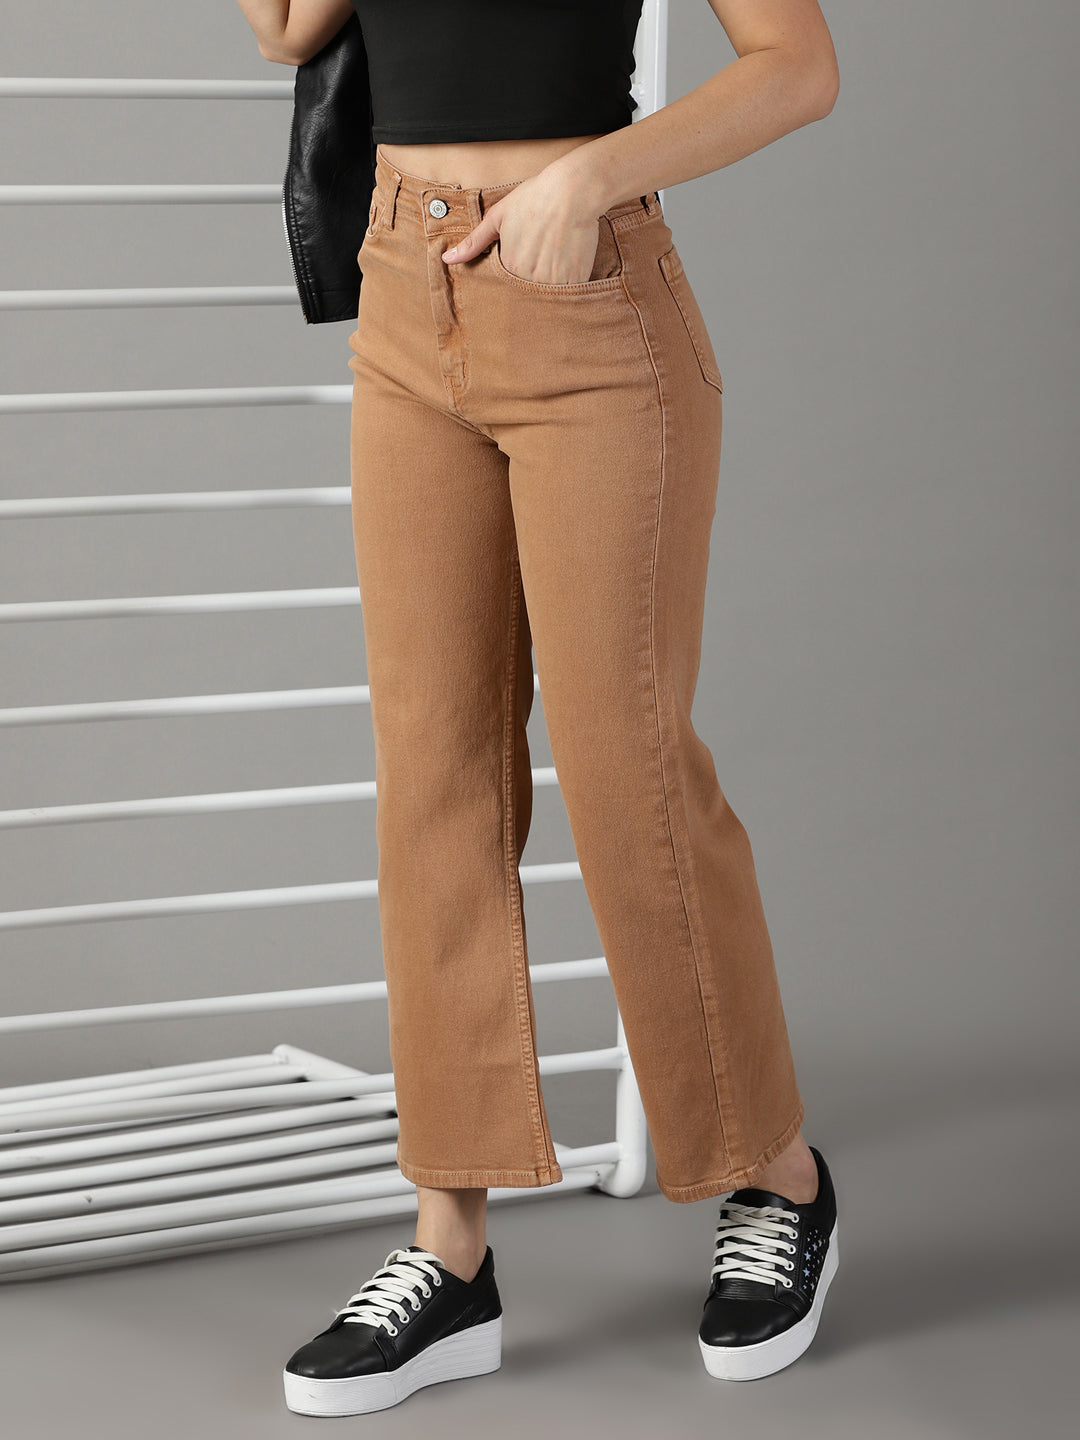 Women's Brown Solid Straight Fit Denim Jeans